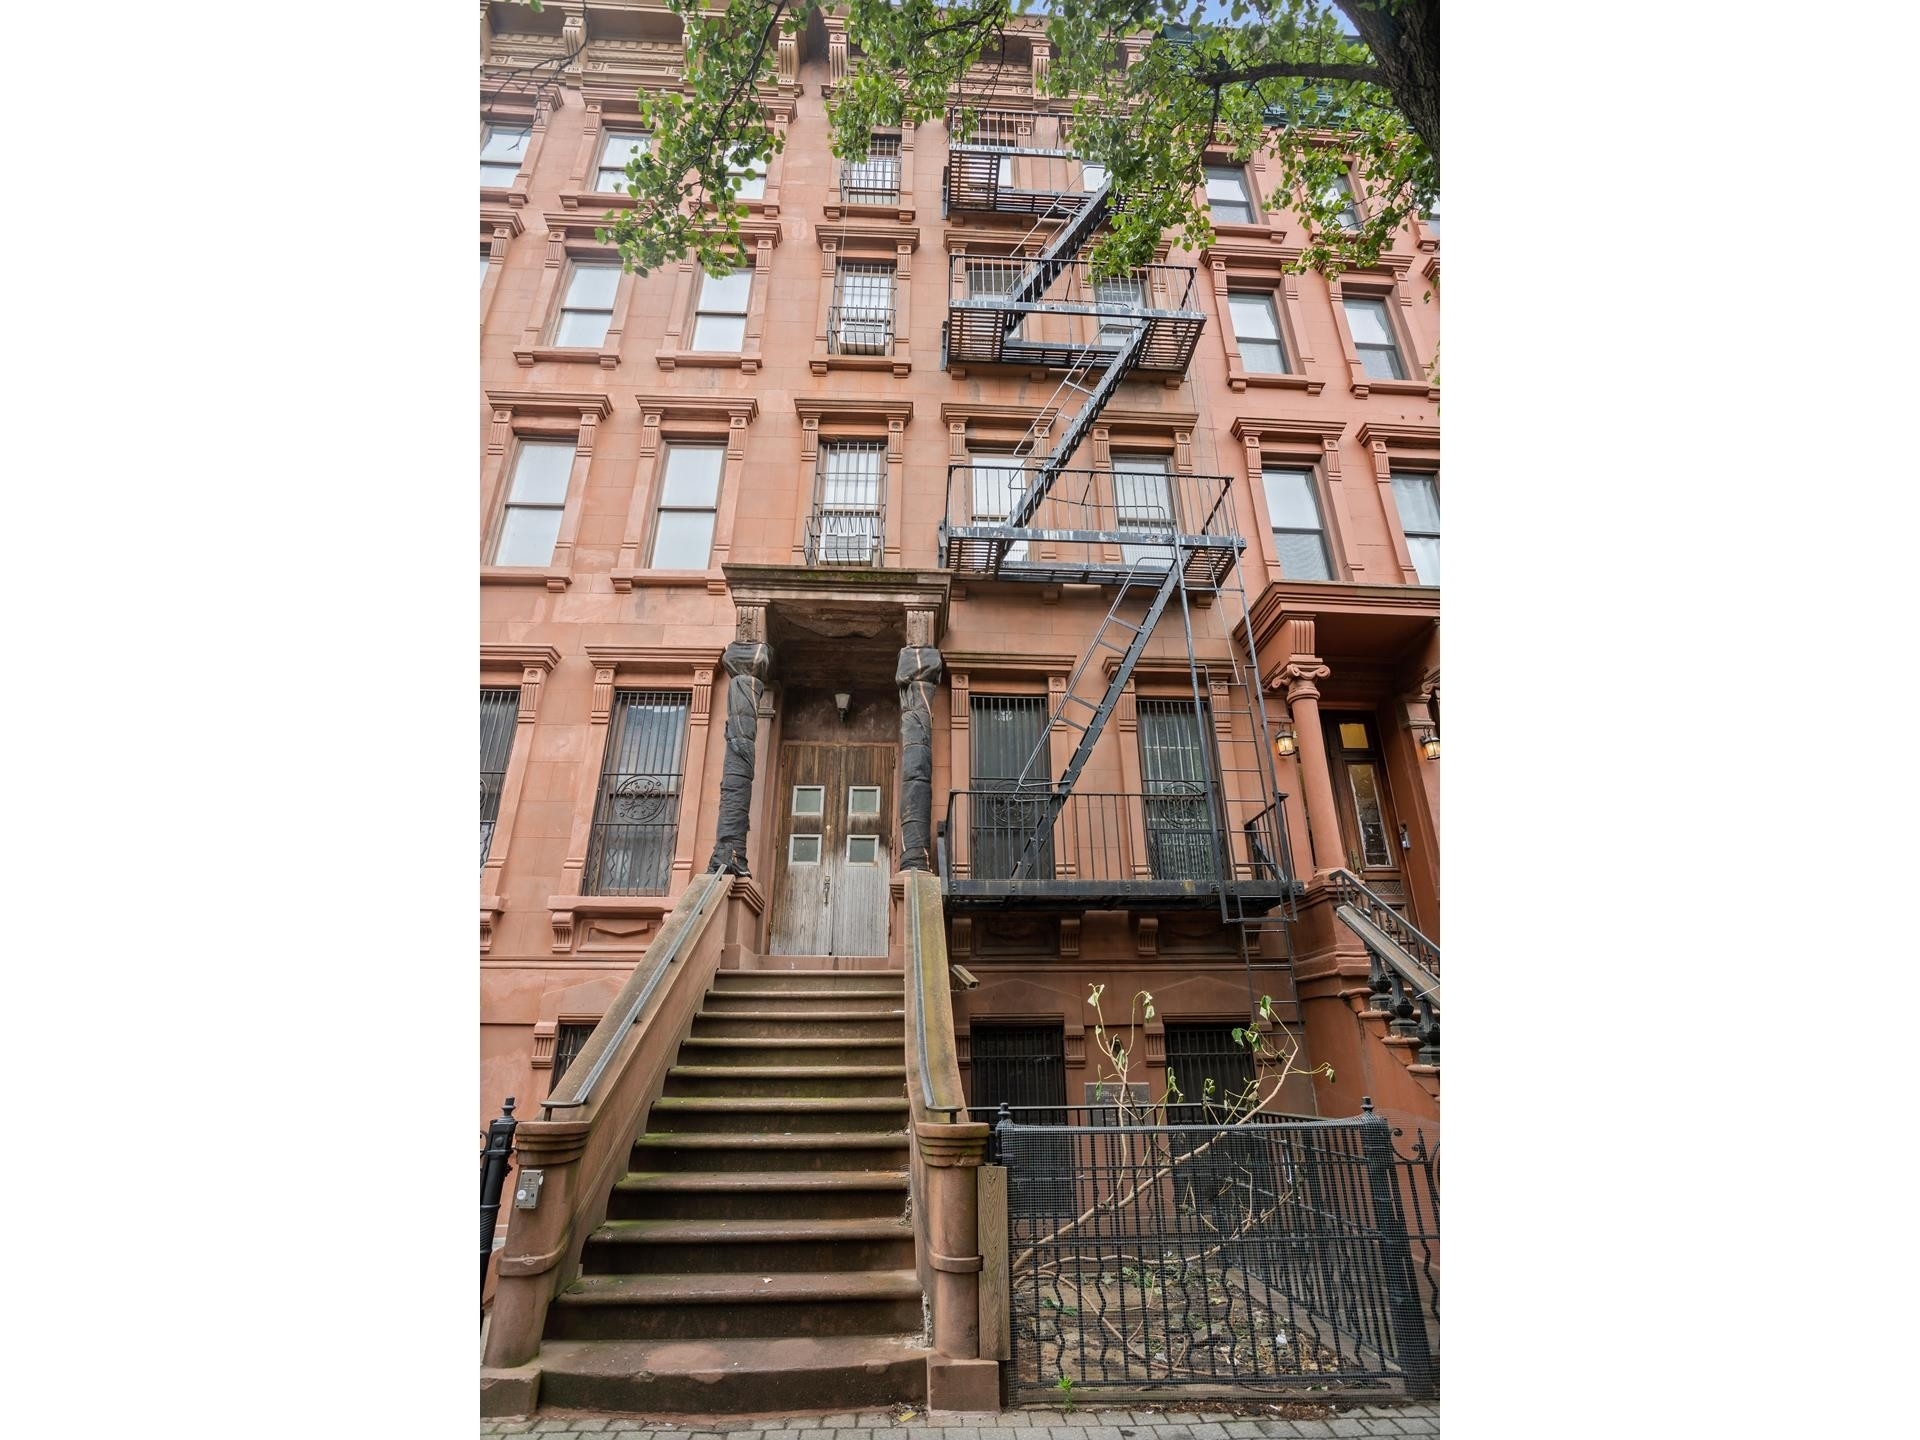 154 W 122ND ST, TOWNHOUSE New York, NY 10027